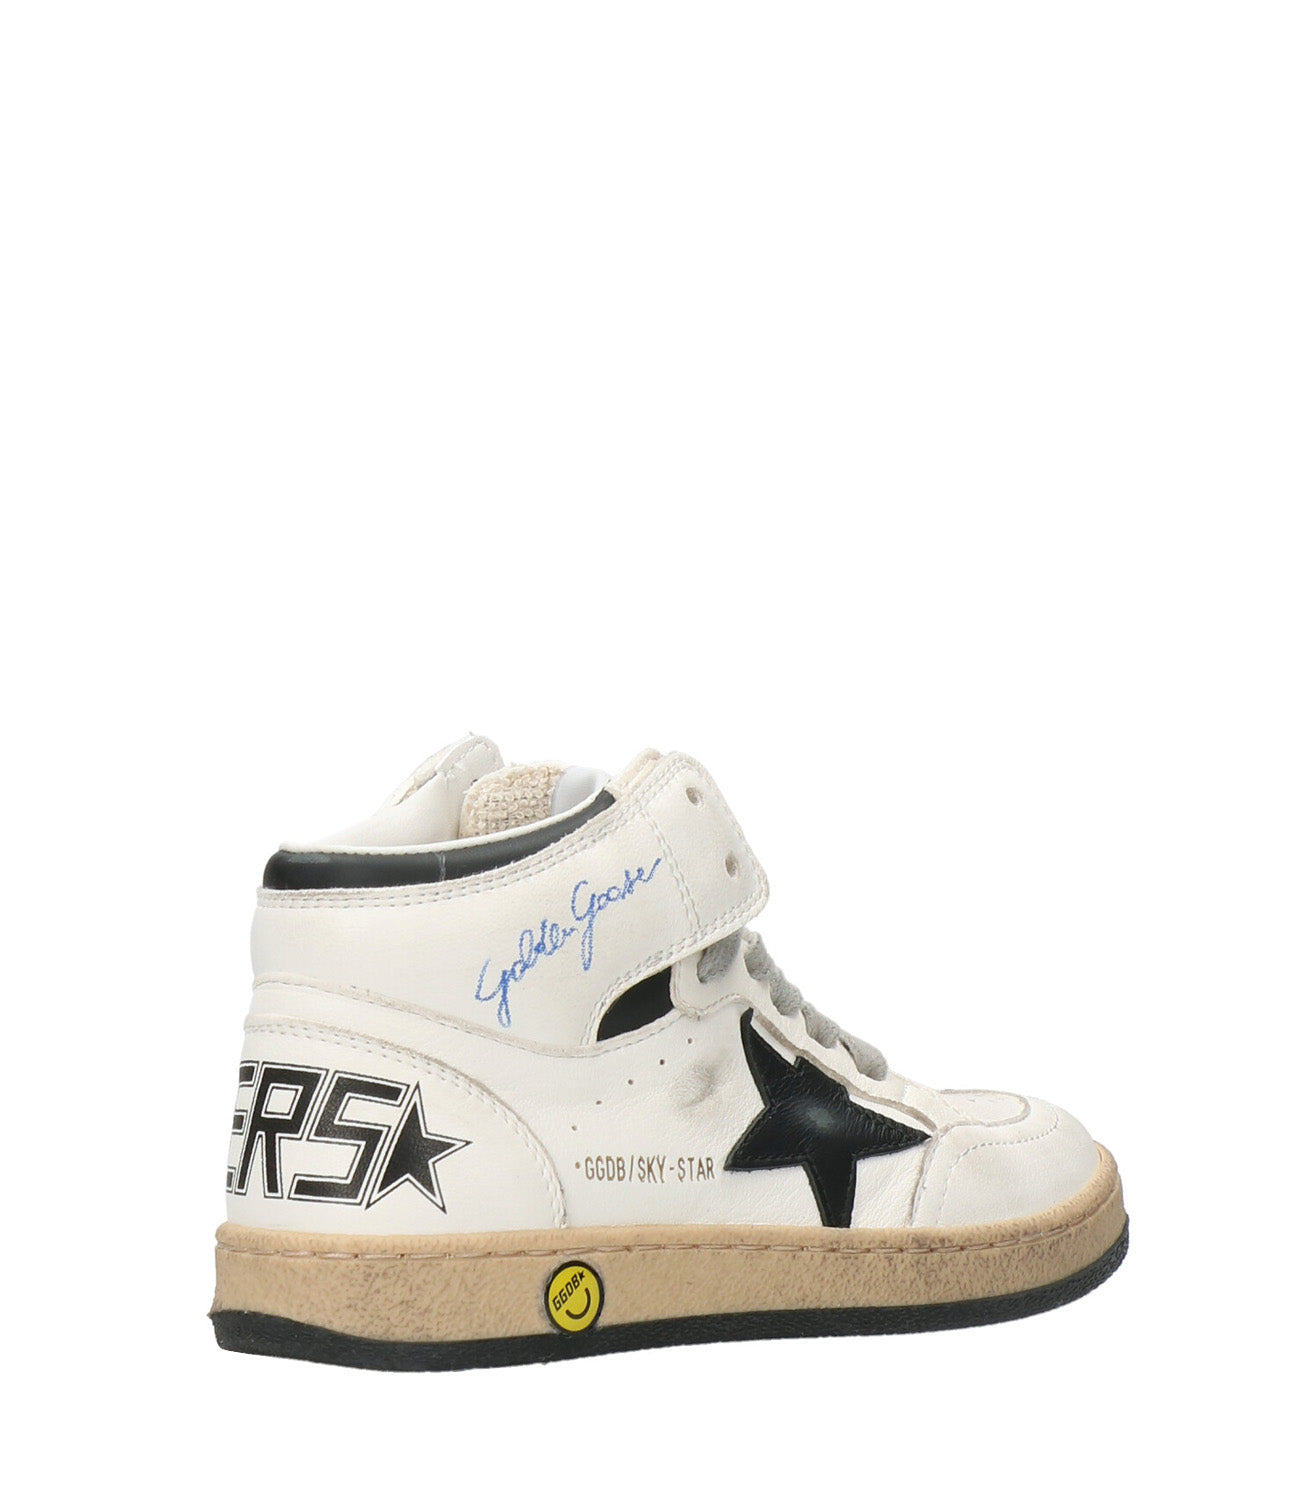 Golden Goose Kids | Sky Star Sneakers Black and White